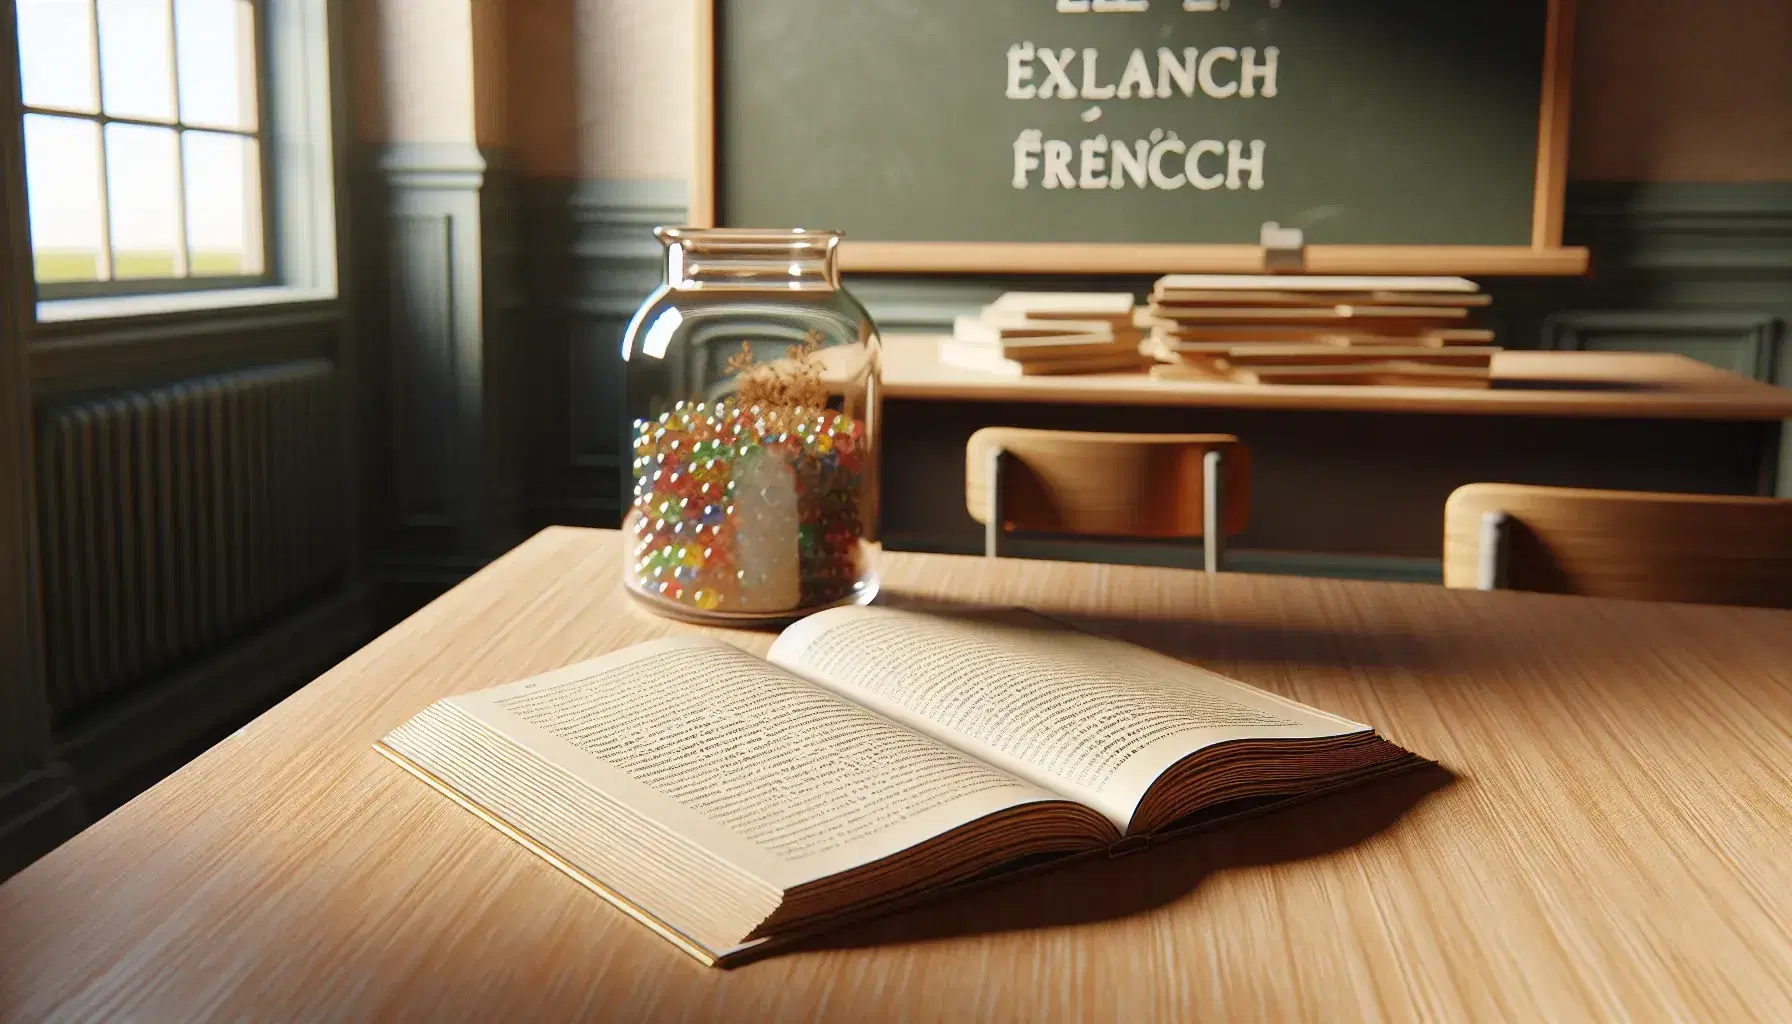 Serene French classroom with an open textbook on a wooden desk, a jar of colorful marbles, a clean chalkboard, and a potted plant on a stool.